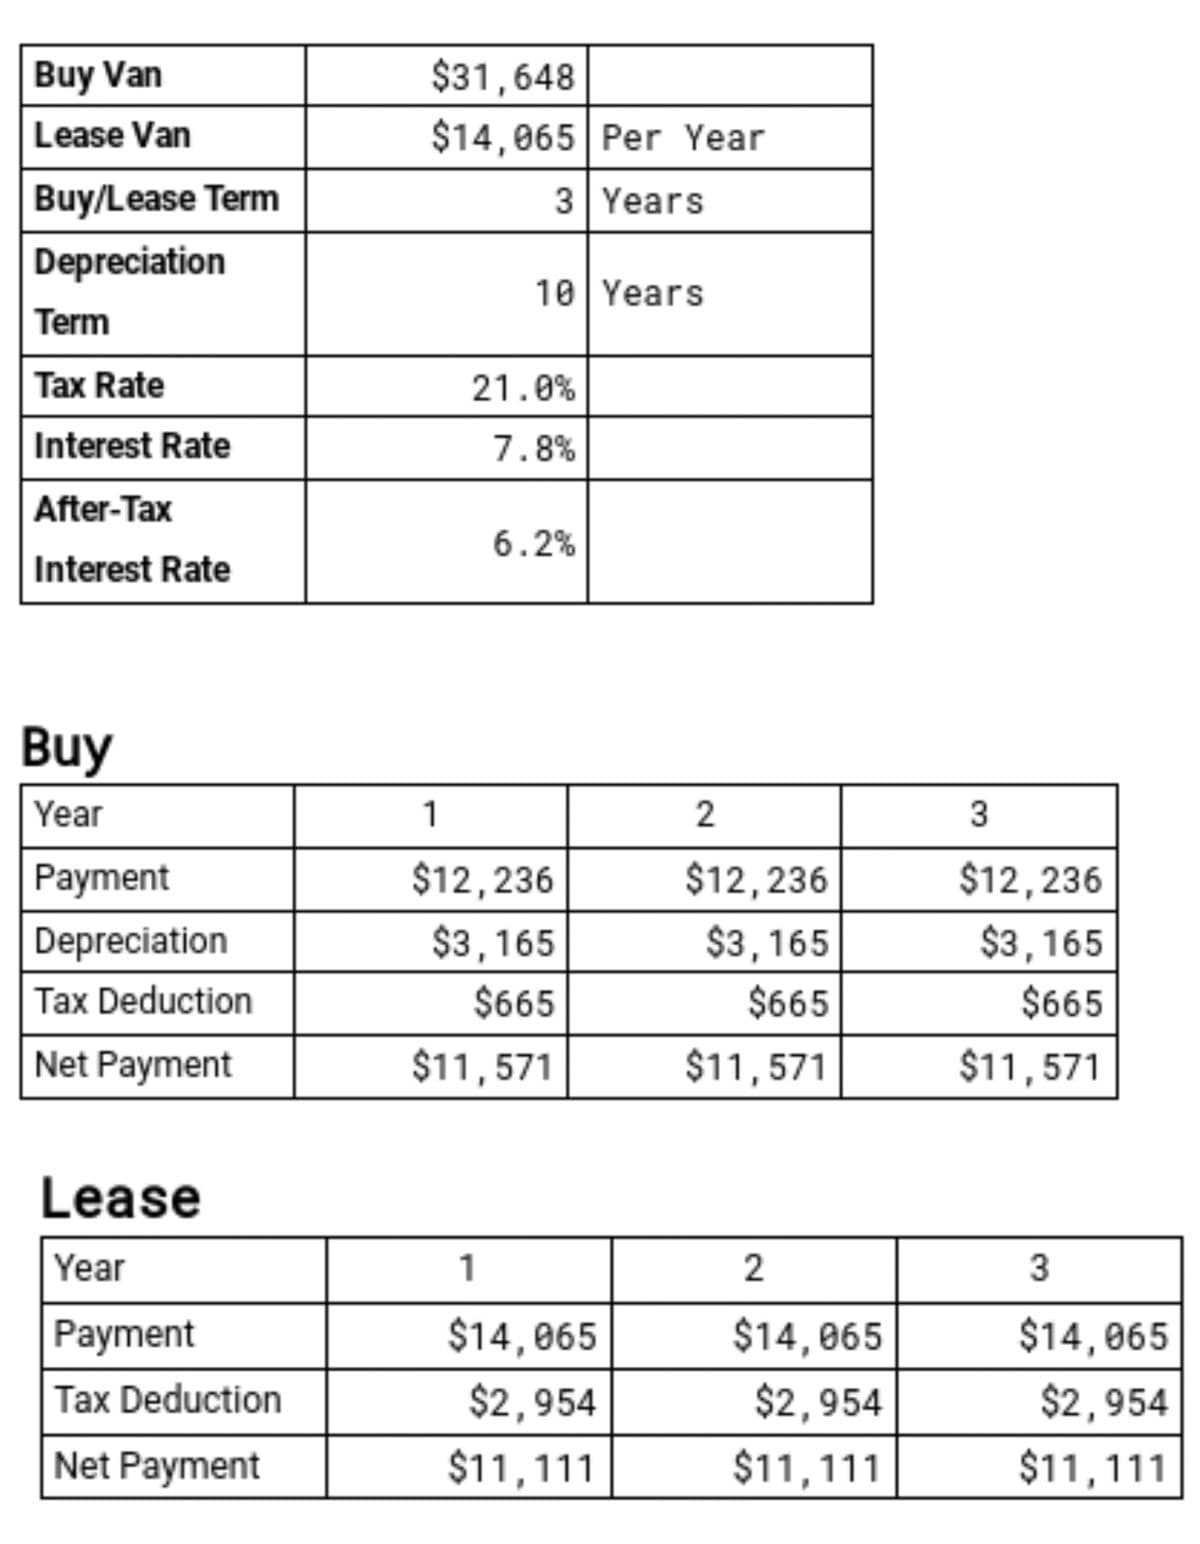 Buy Van
Lease Van
Buy/Lease Term
Depreciation
Term
Tax Rate
Interest Rate
After-Tax
Interest Rate
Buy
Year
Payment
Depreciation
Tax Deduction
Net Payment
Lease
Year
Payment
Tax Deduction
Net Payment
$31,648
$14,065 Per Year
3 Years
1
10 Years
21.0%
7.8%
6.2%
$12,236
$3,165
$665
$11,571
1
$14,065
$2,954
$11,111
2
$12,236
$3,165
$665
$11,571
2
$14,065
$2,954
$11,111
3
$12,236
$3,165
$665
$11,571
3
$14,065
$2,954
$11,111